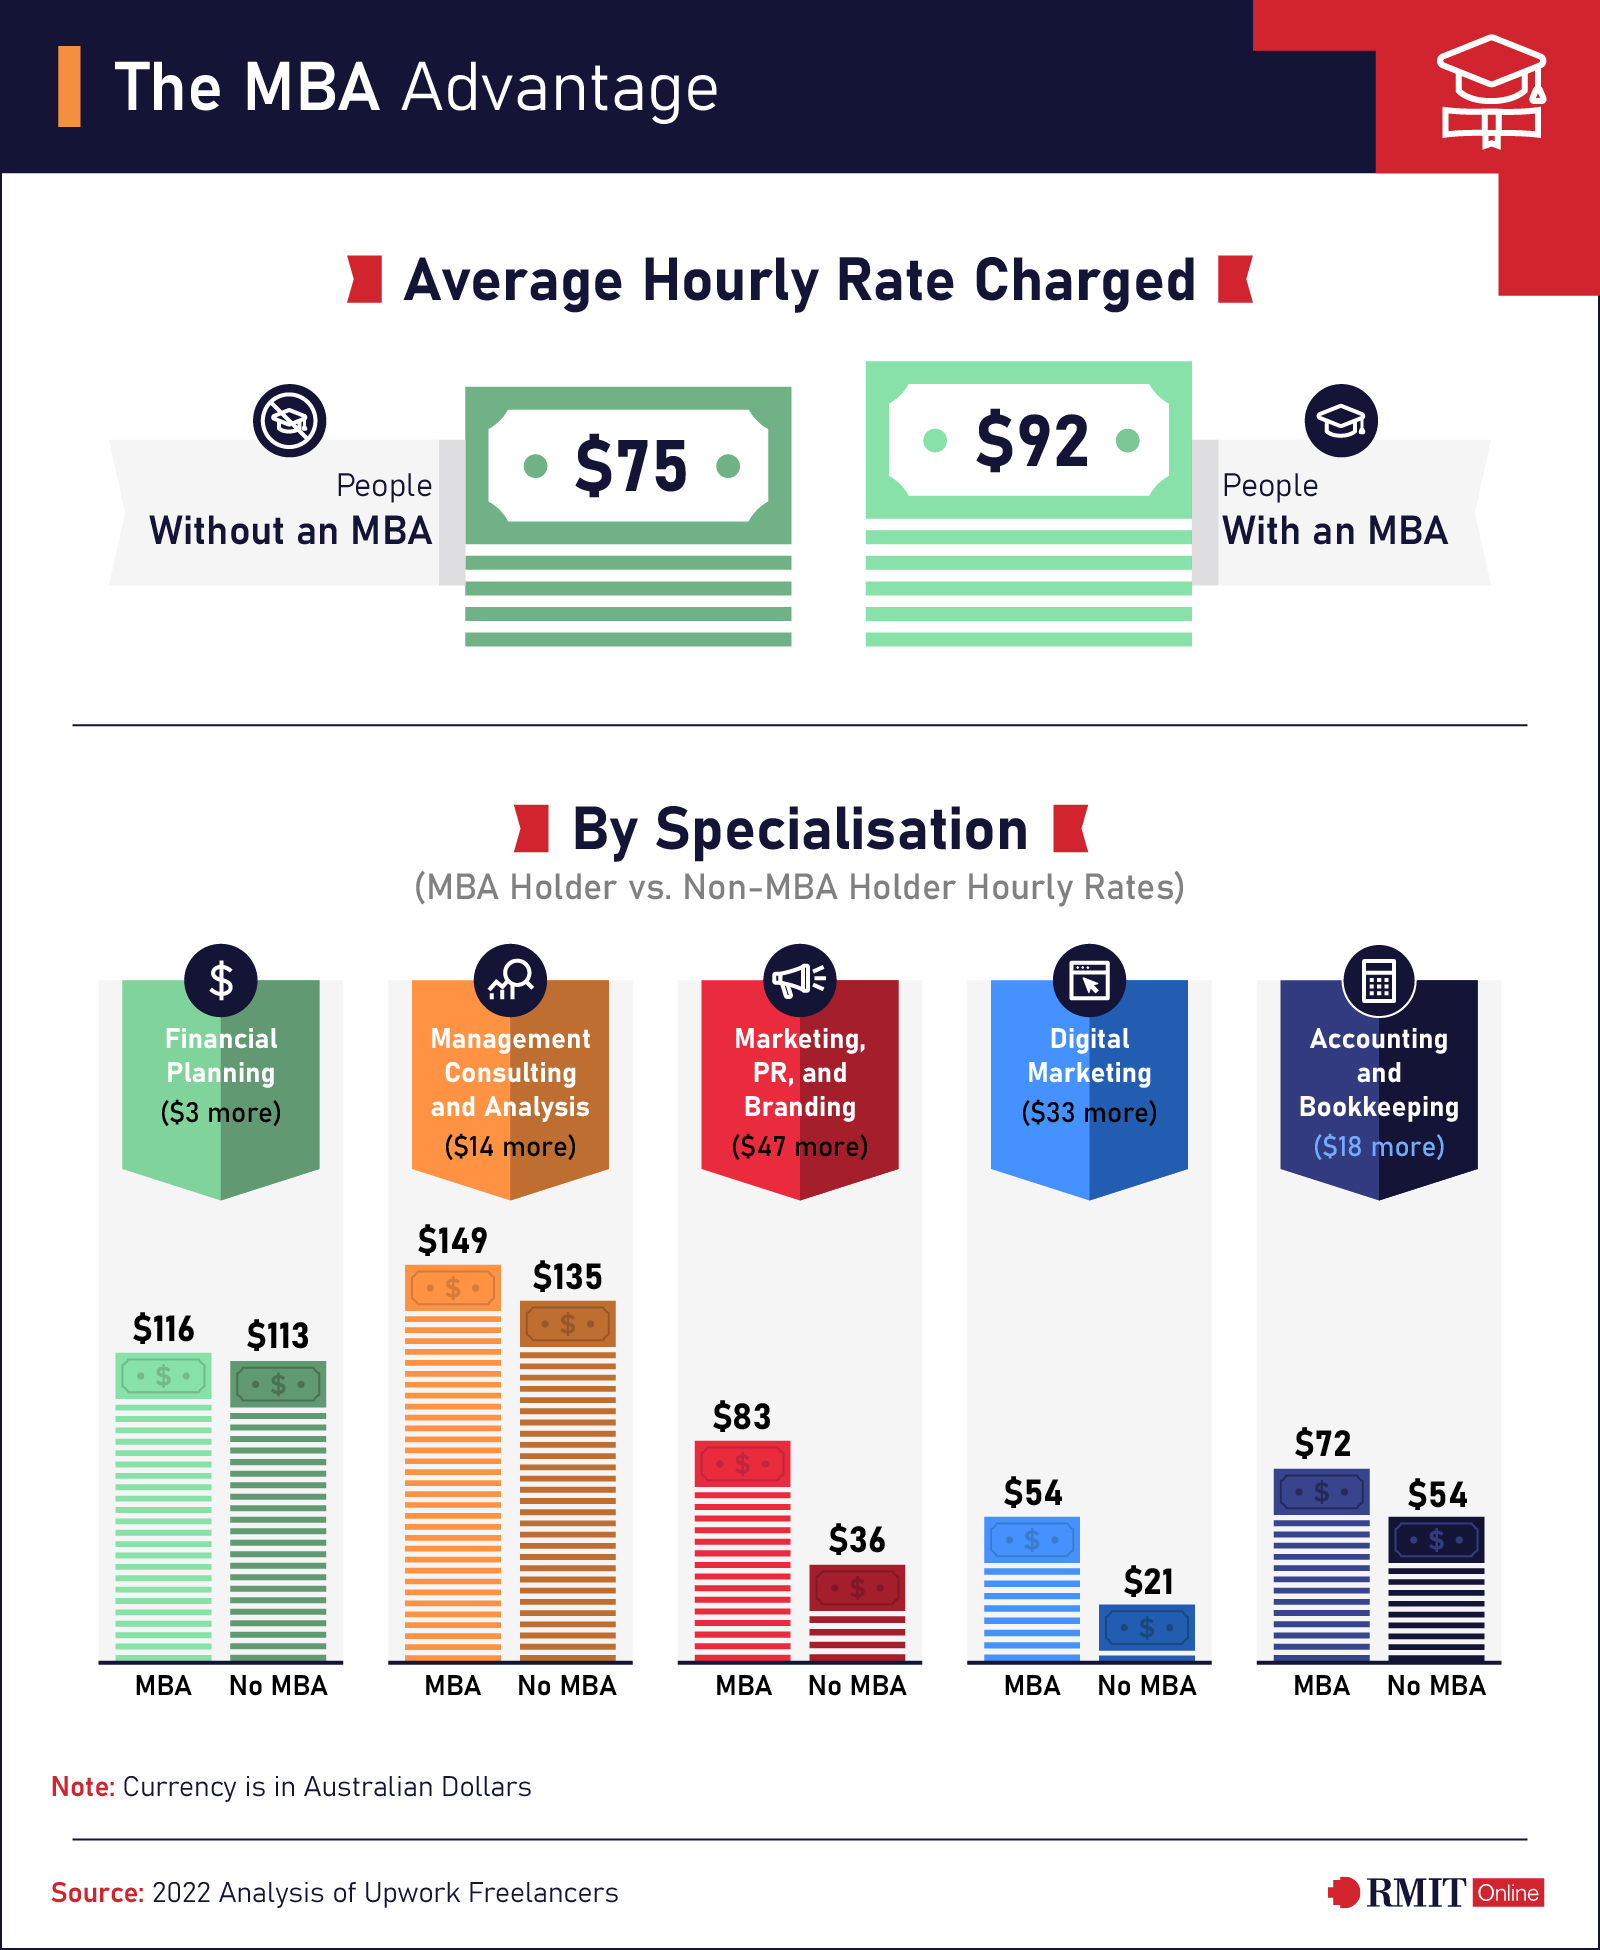 Infographic: The MBA advantage: comparing an MBA holder vs a non-MBA holder hourly salary rates by specialisation: financial planning, management consulting and analysis, marketing, PR and branding, digital marketing and accounting and bookkeeping